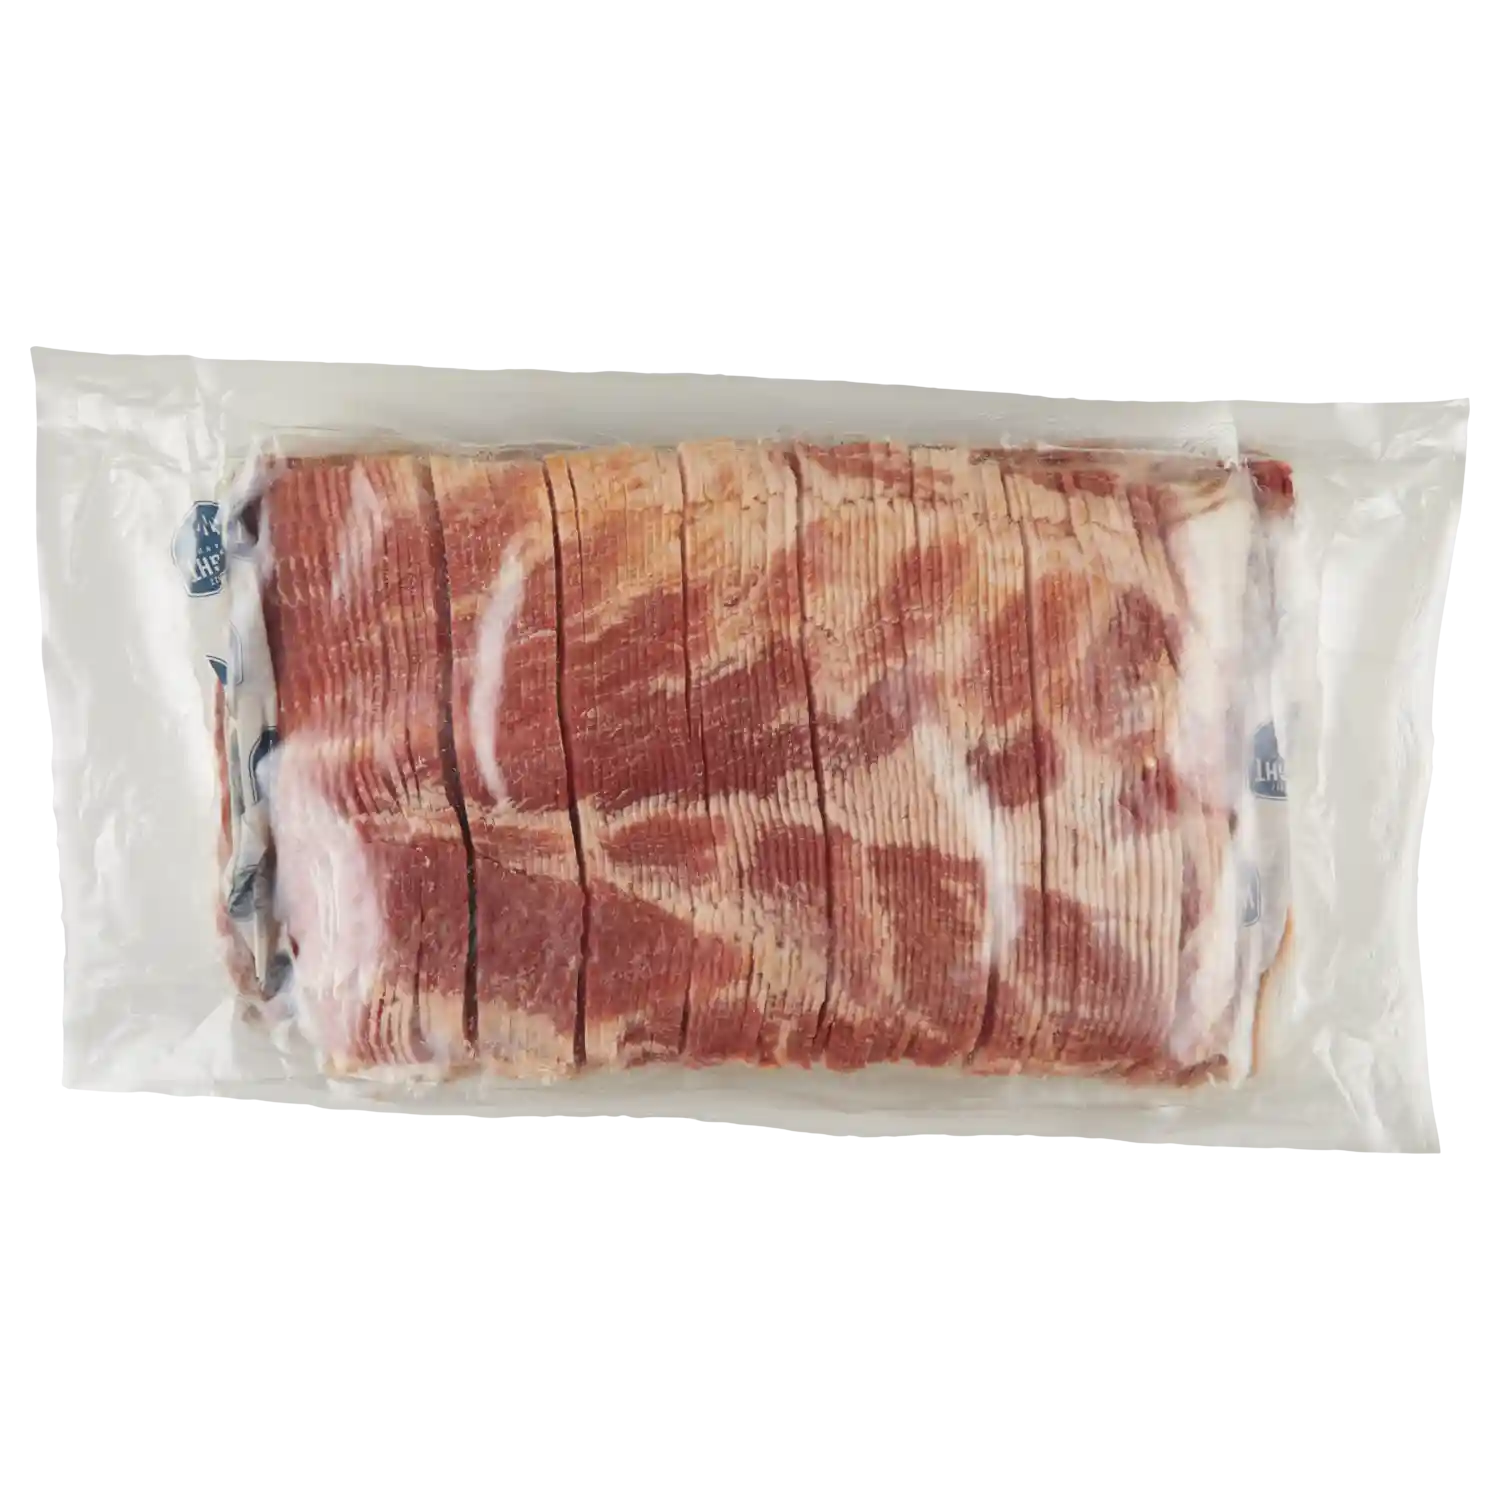 Wright® Brand Naturally Smoked Regular Sliced Bacon, Bulk, 30 Lbs, 14-18 Slices per Pound, Gas Flushed_image_21